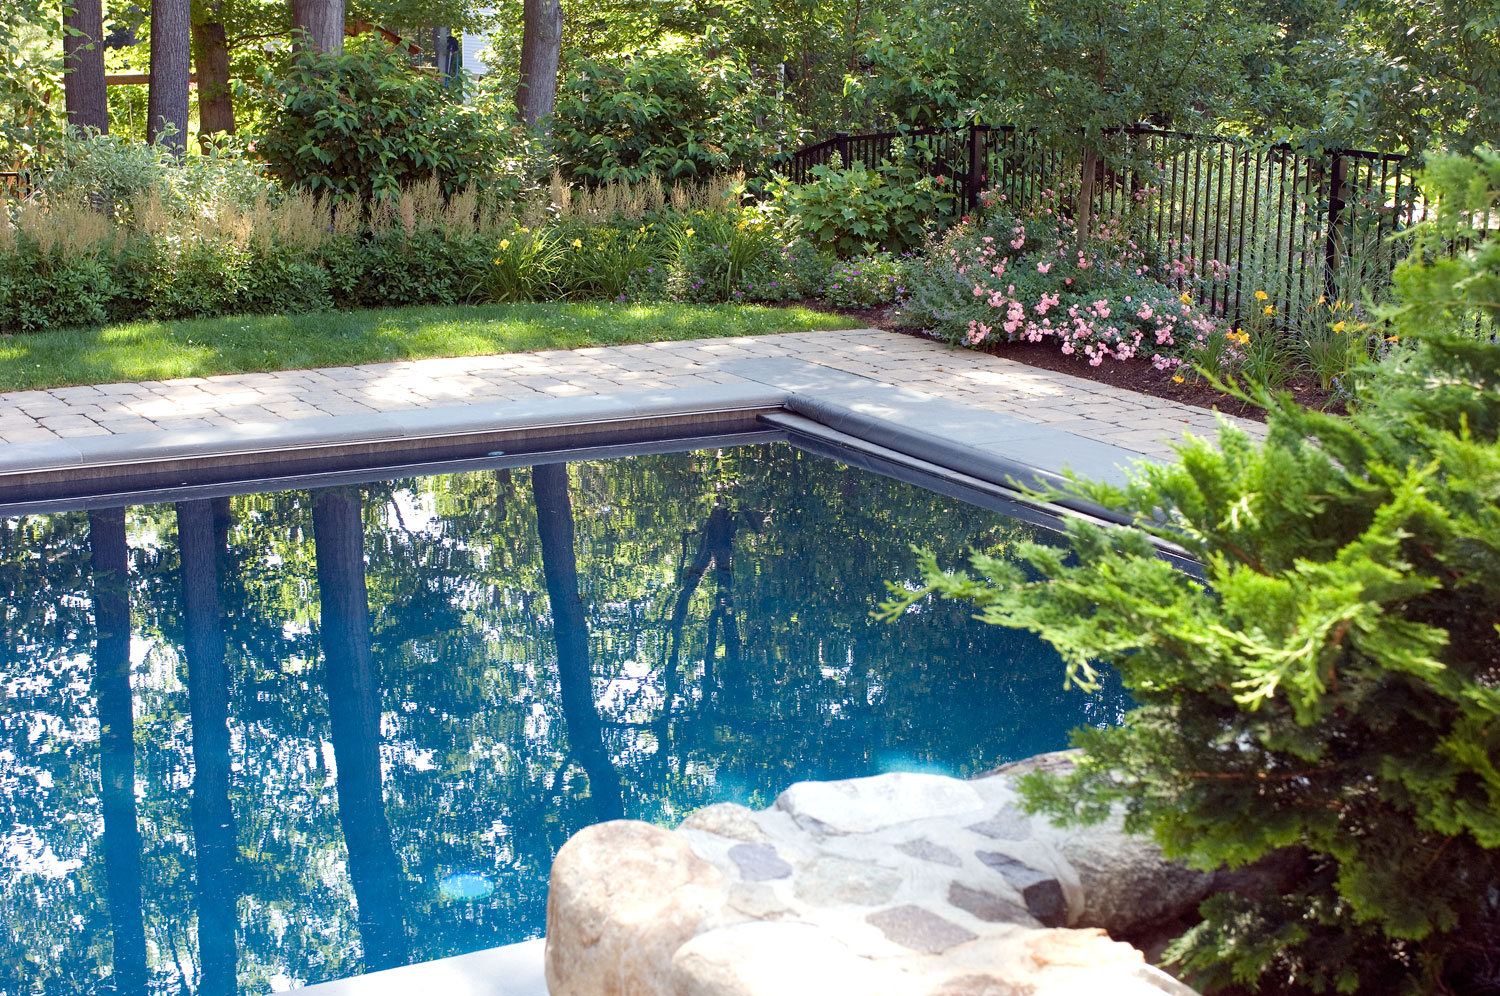 A serene backyard setting featuring a covered swimming pool, landscaped garden, a stone pathway, lush greenery, and a decorative wrought-iron fence.